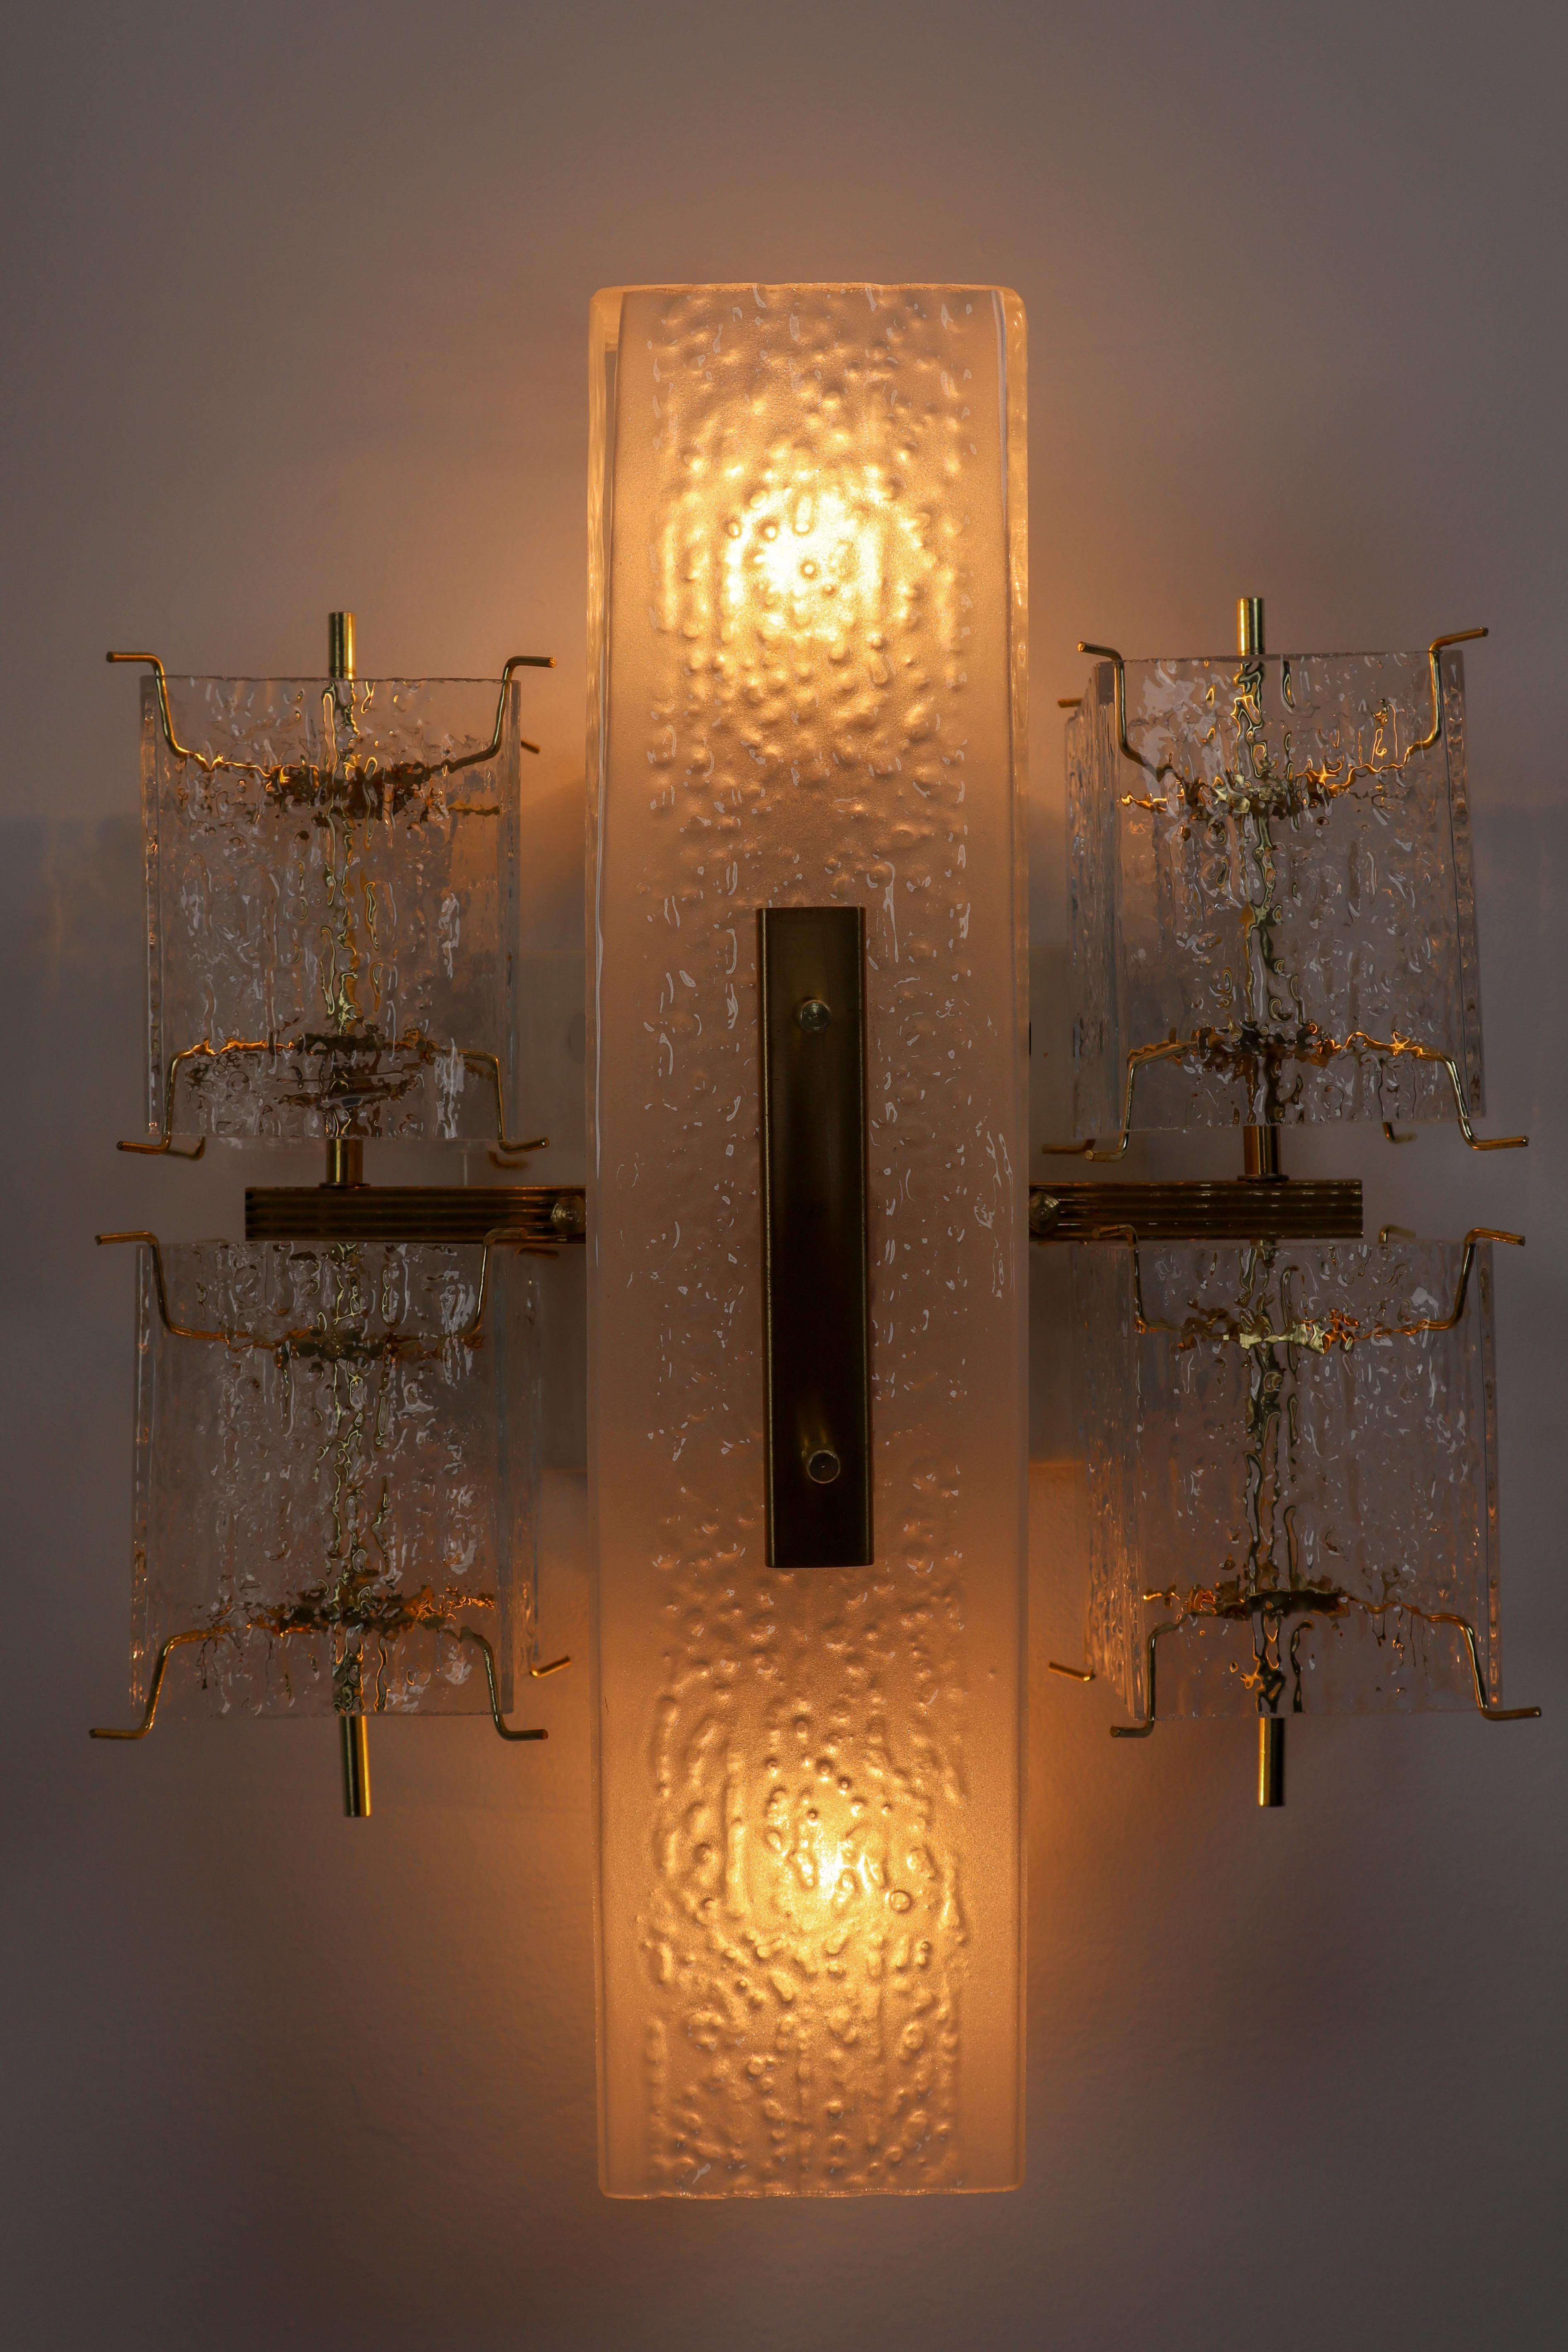 1 of 8 Midcentury Wall Lights with Structured Glass and Brass, Europe, 1970s For Sale 1